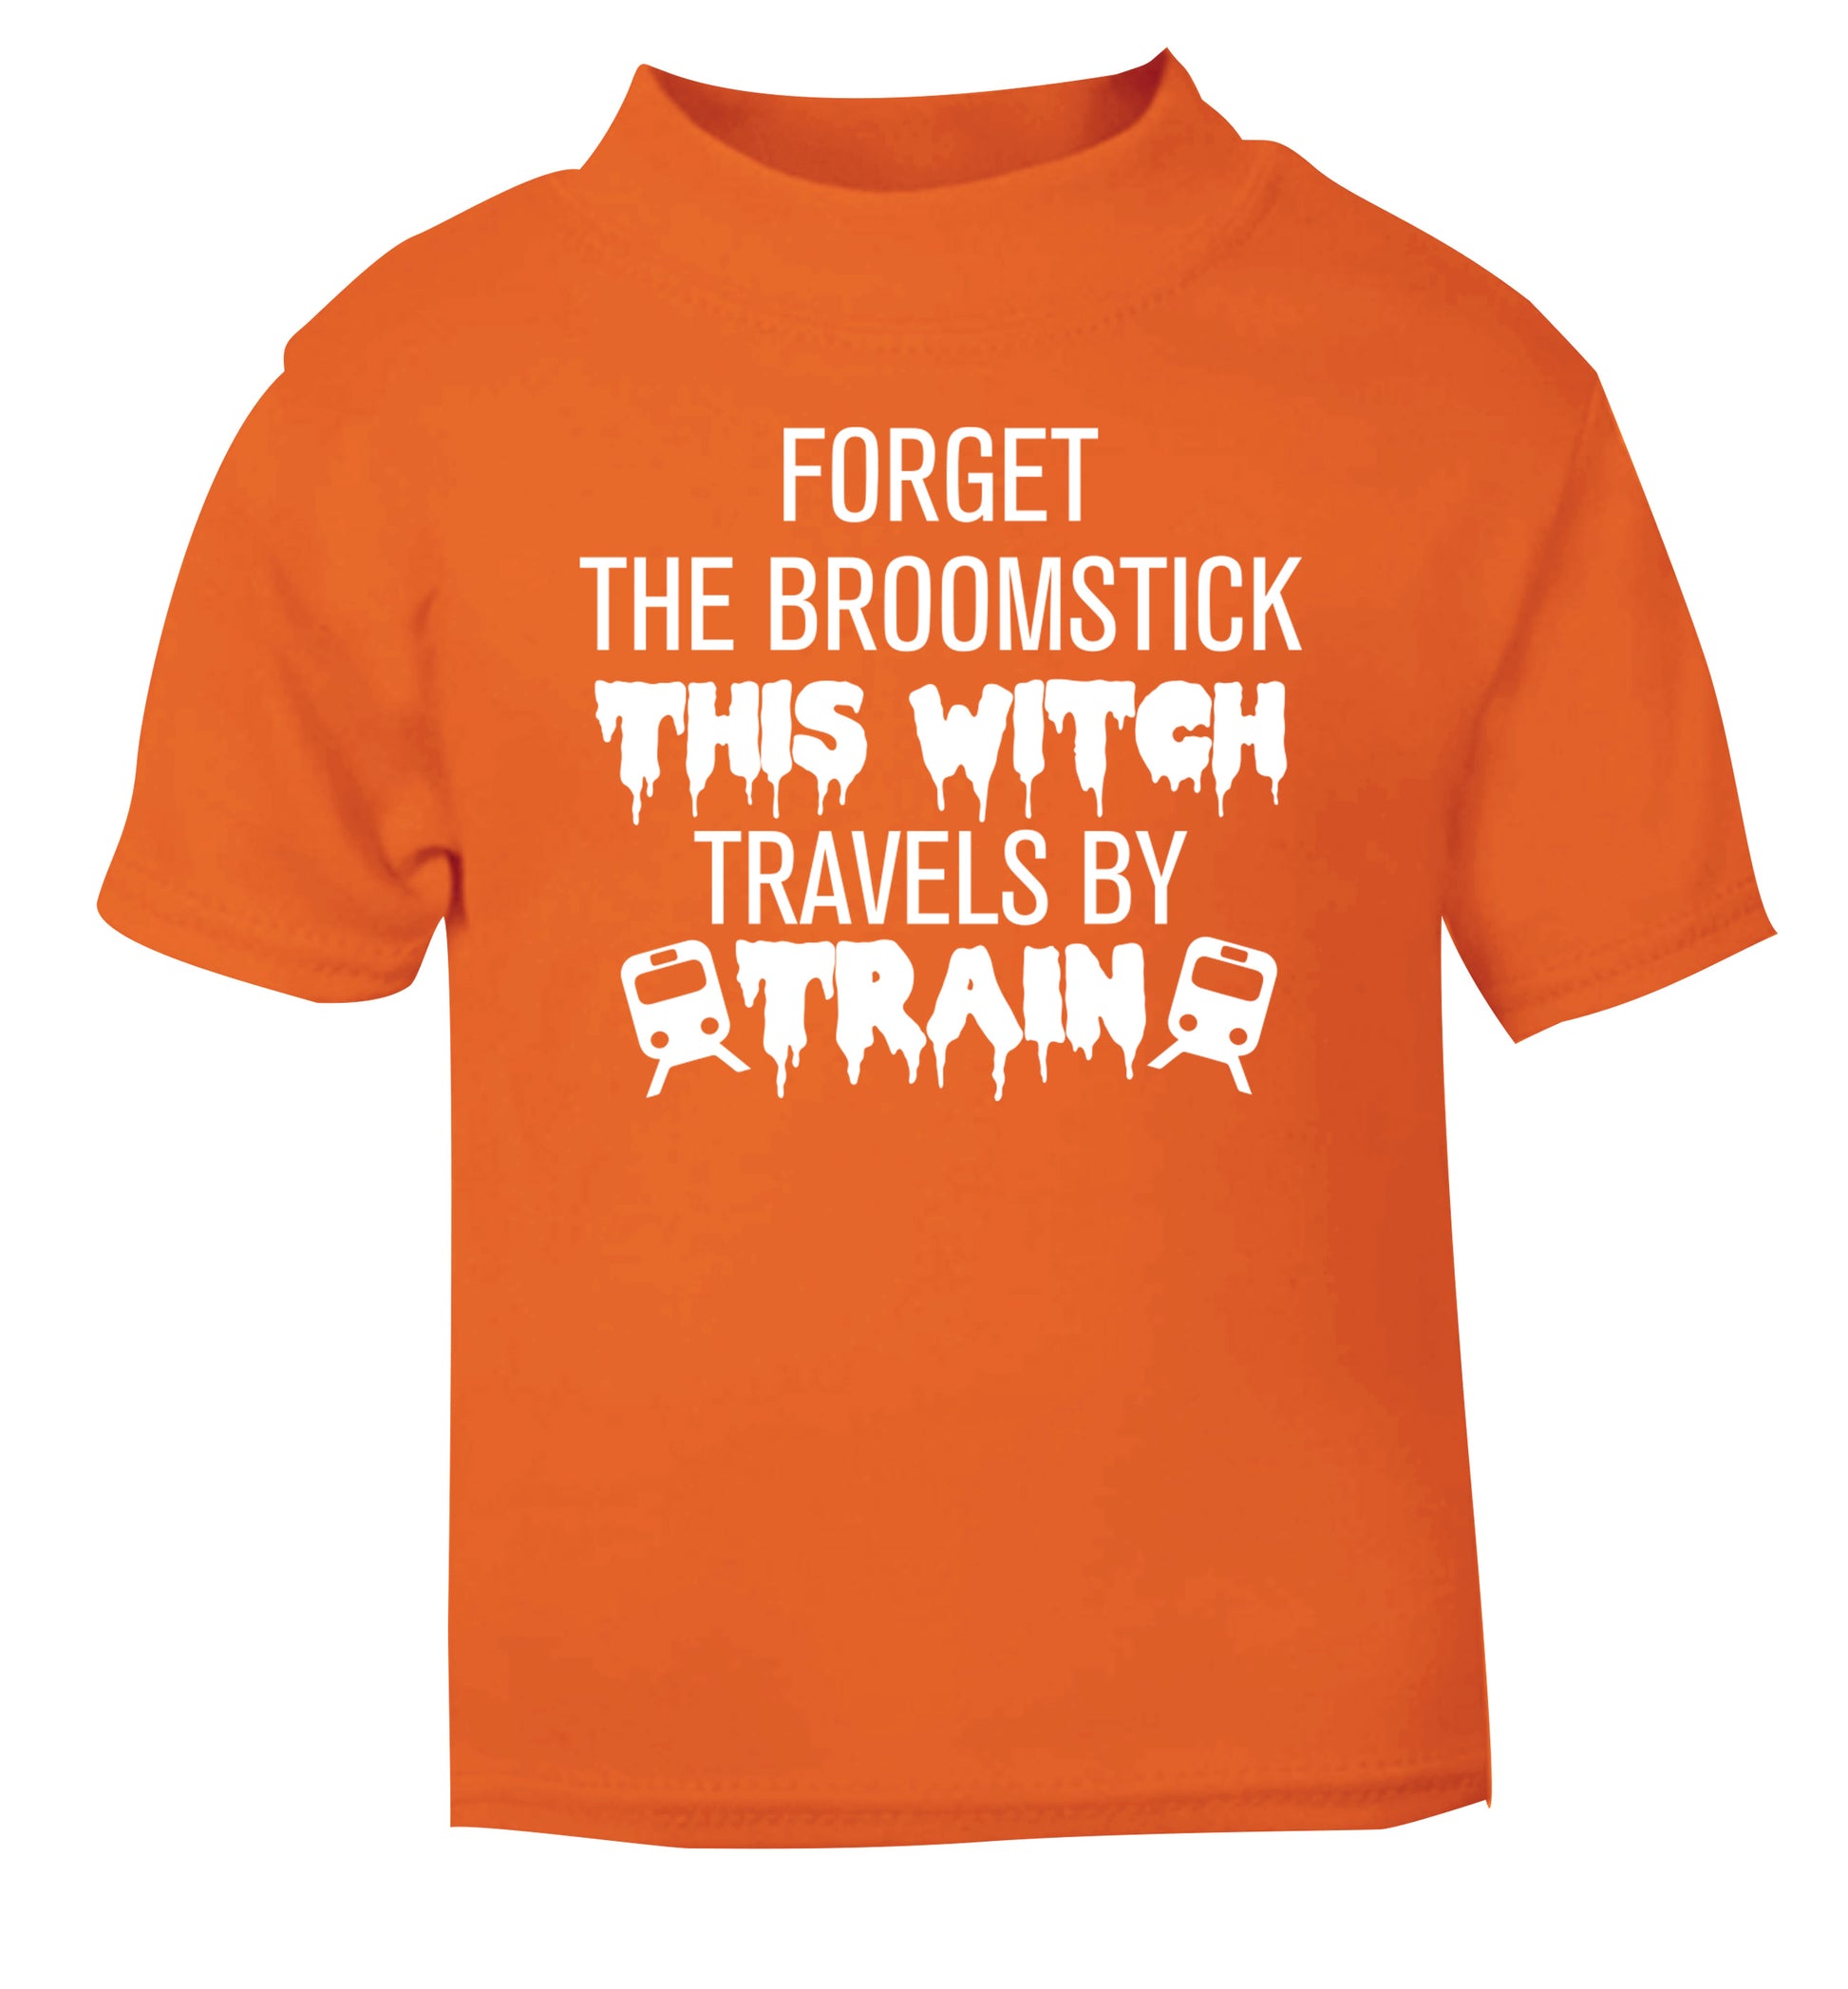 Forget the broomstick this witch travels by train orange Baby Toddler Tshirt 2 Years